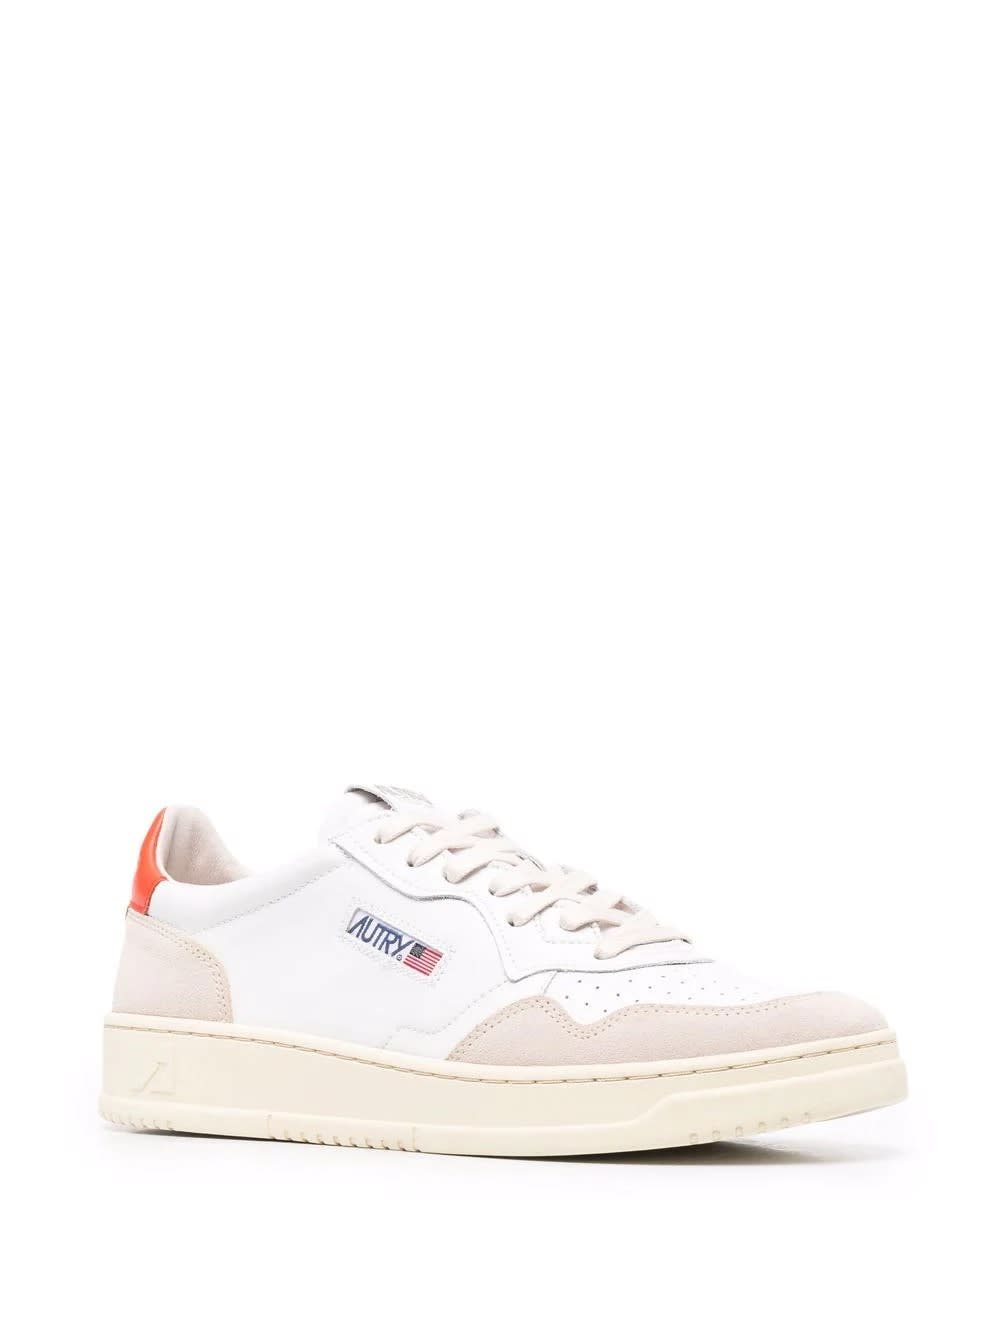 Shop Autry Medalist Low Sneakers In White And Orange Suede And Leather